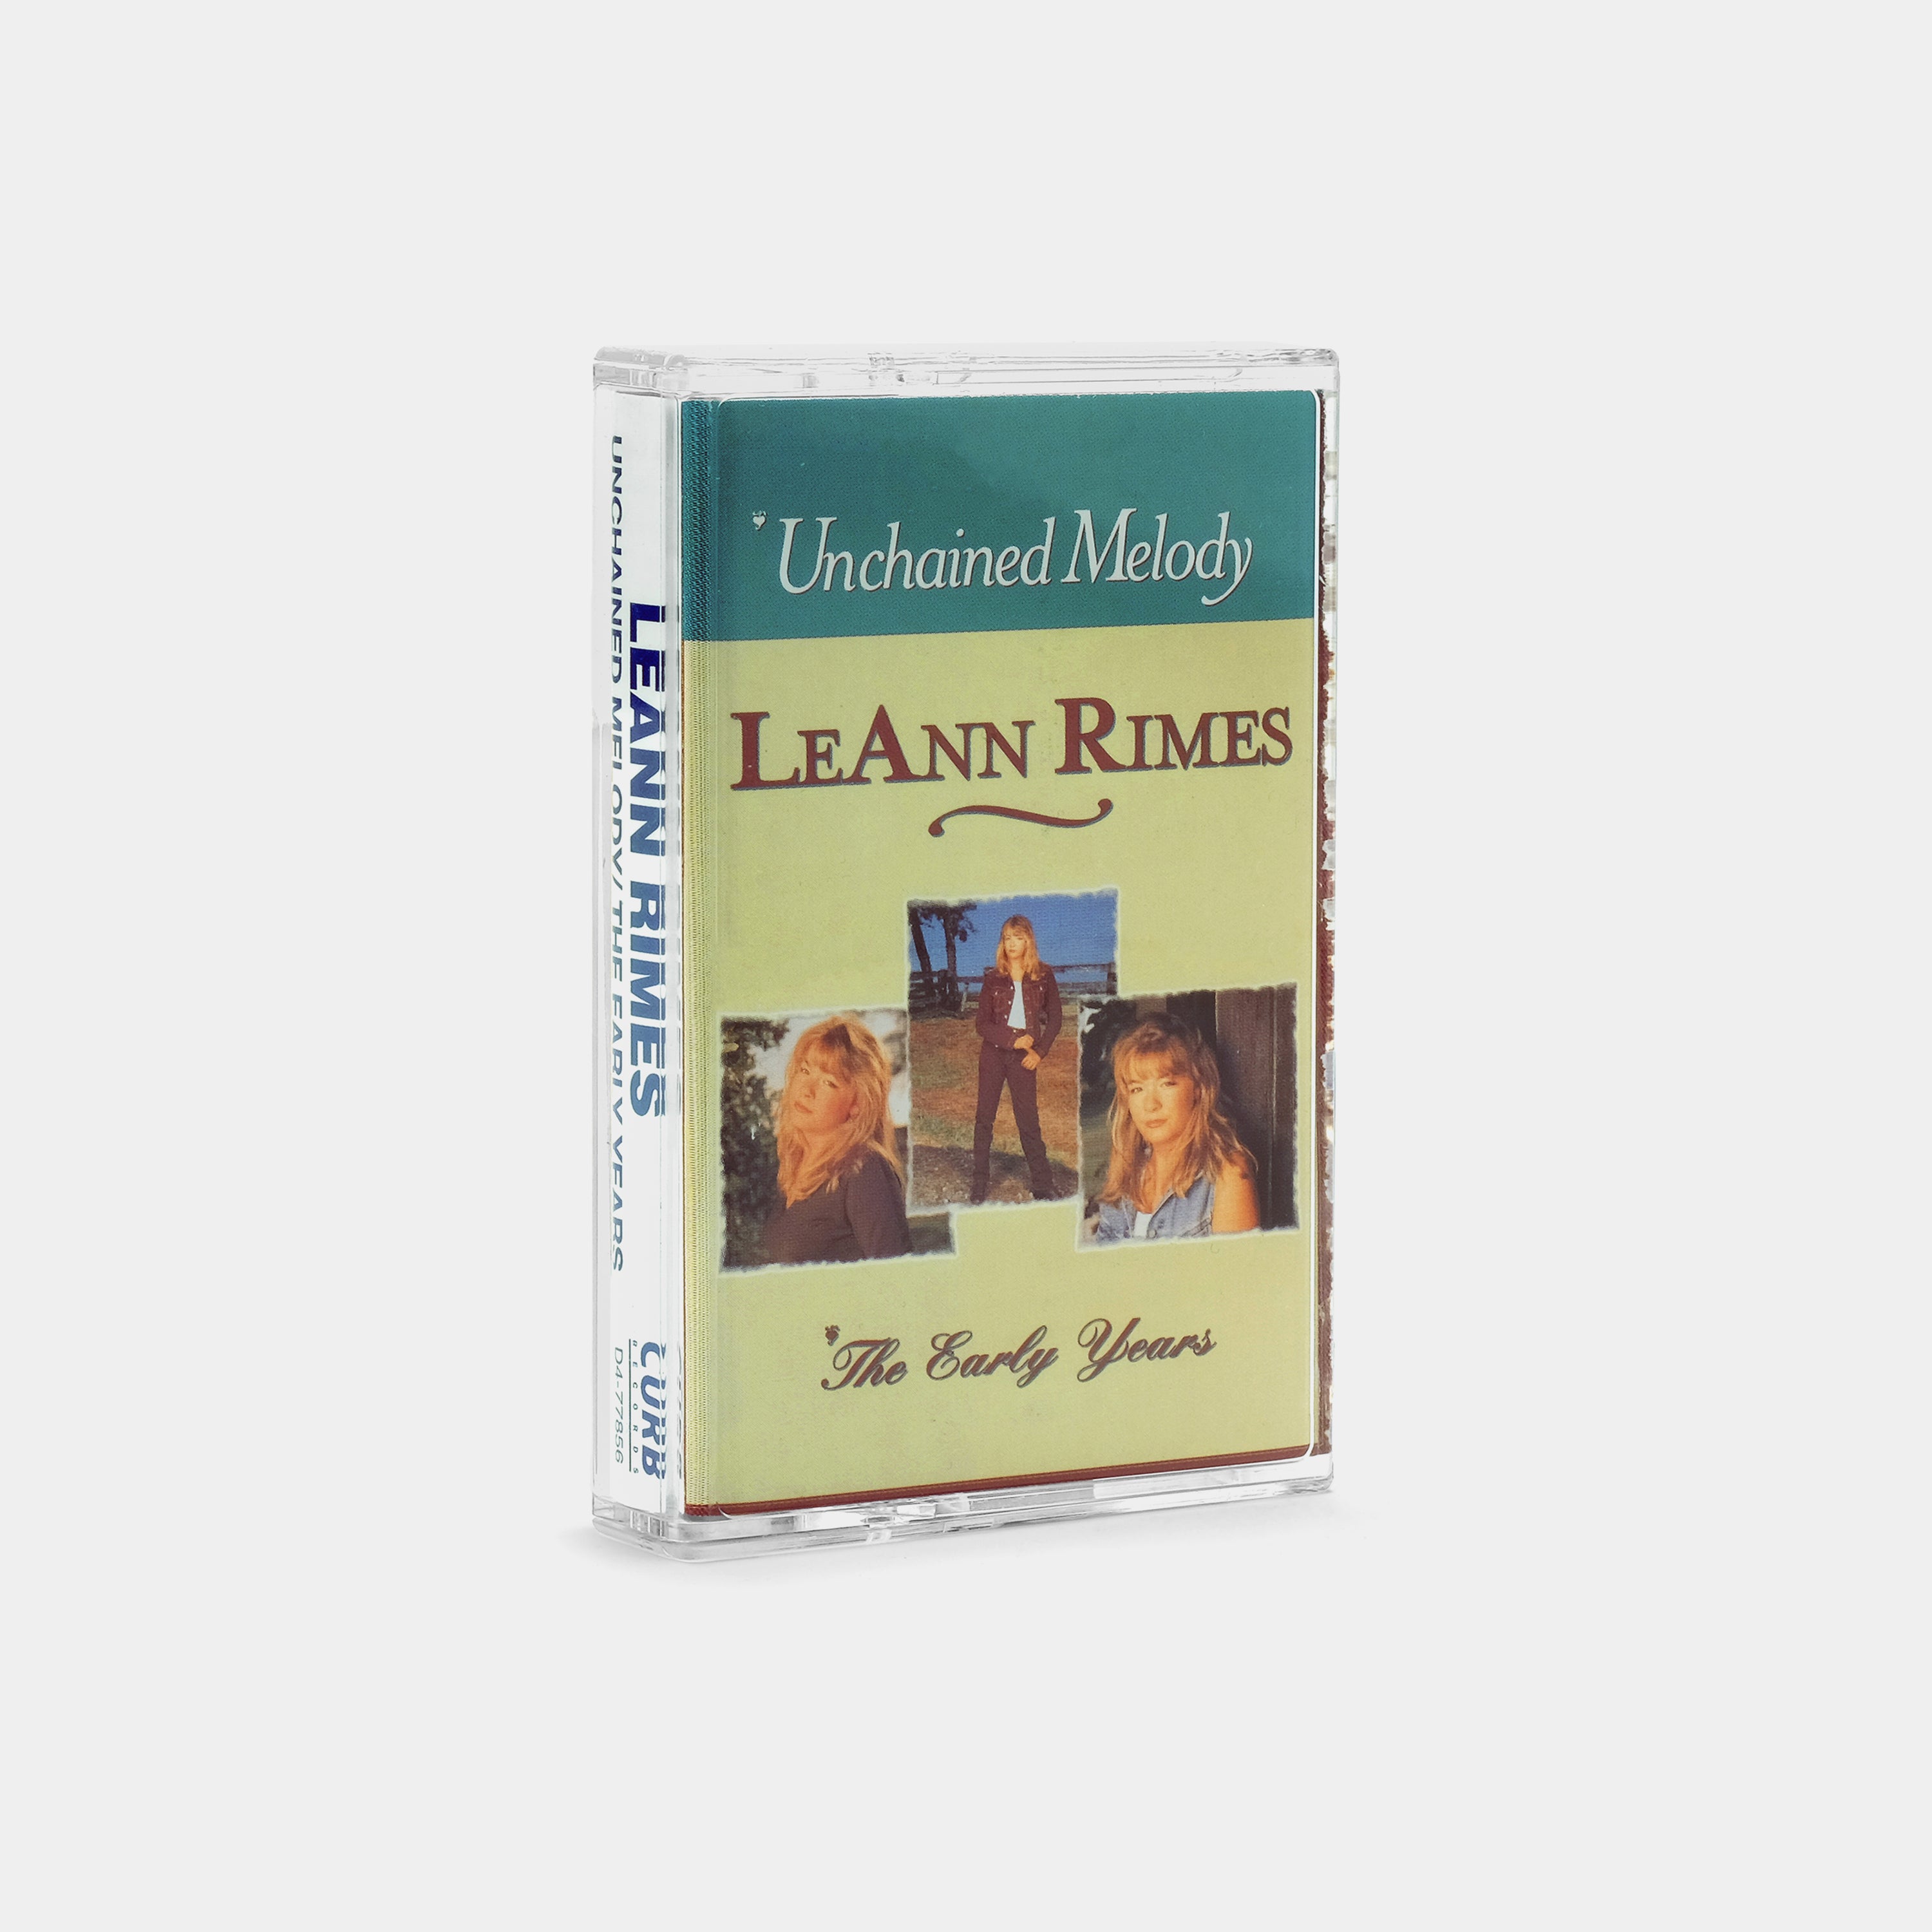 LeAnn Rimes - The Early Years Cassette Tape